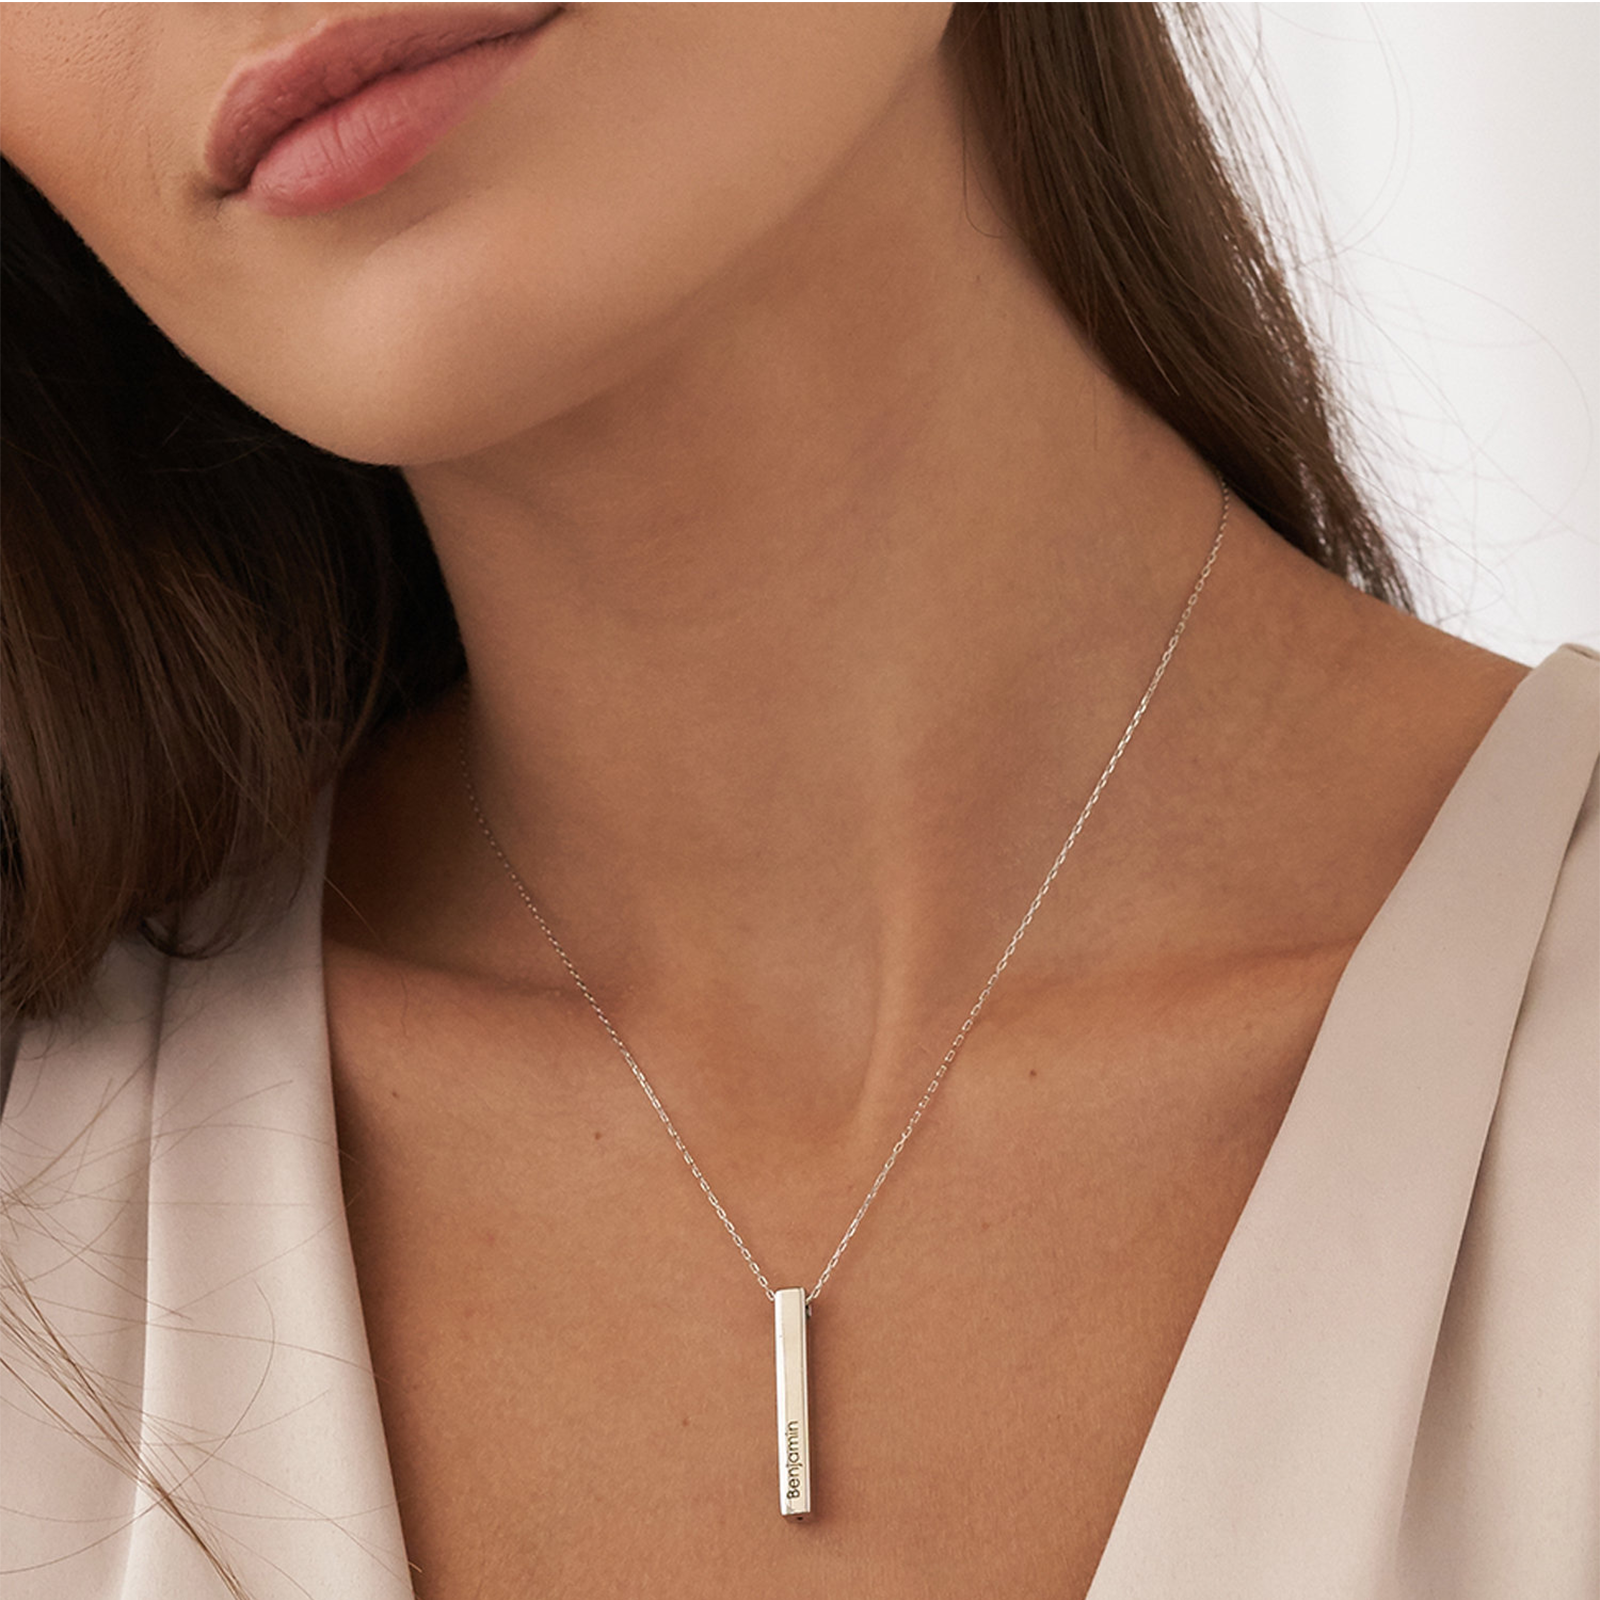 Stainless Steel Vertical Bar Necklace (6pcs)